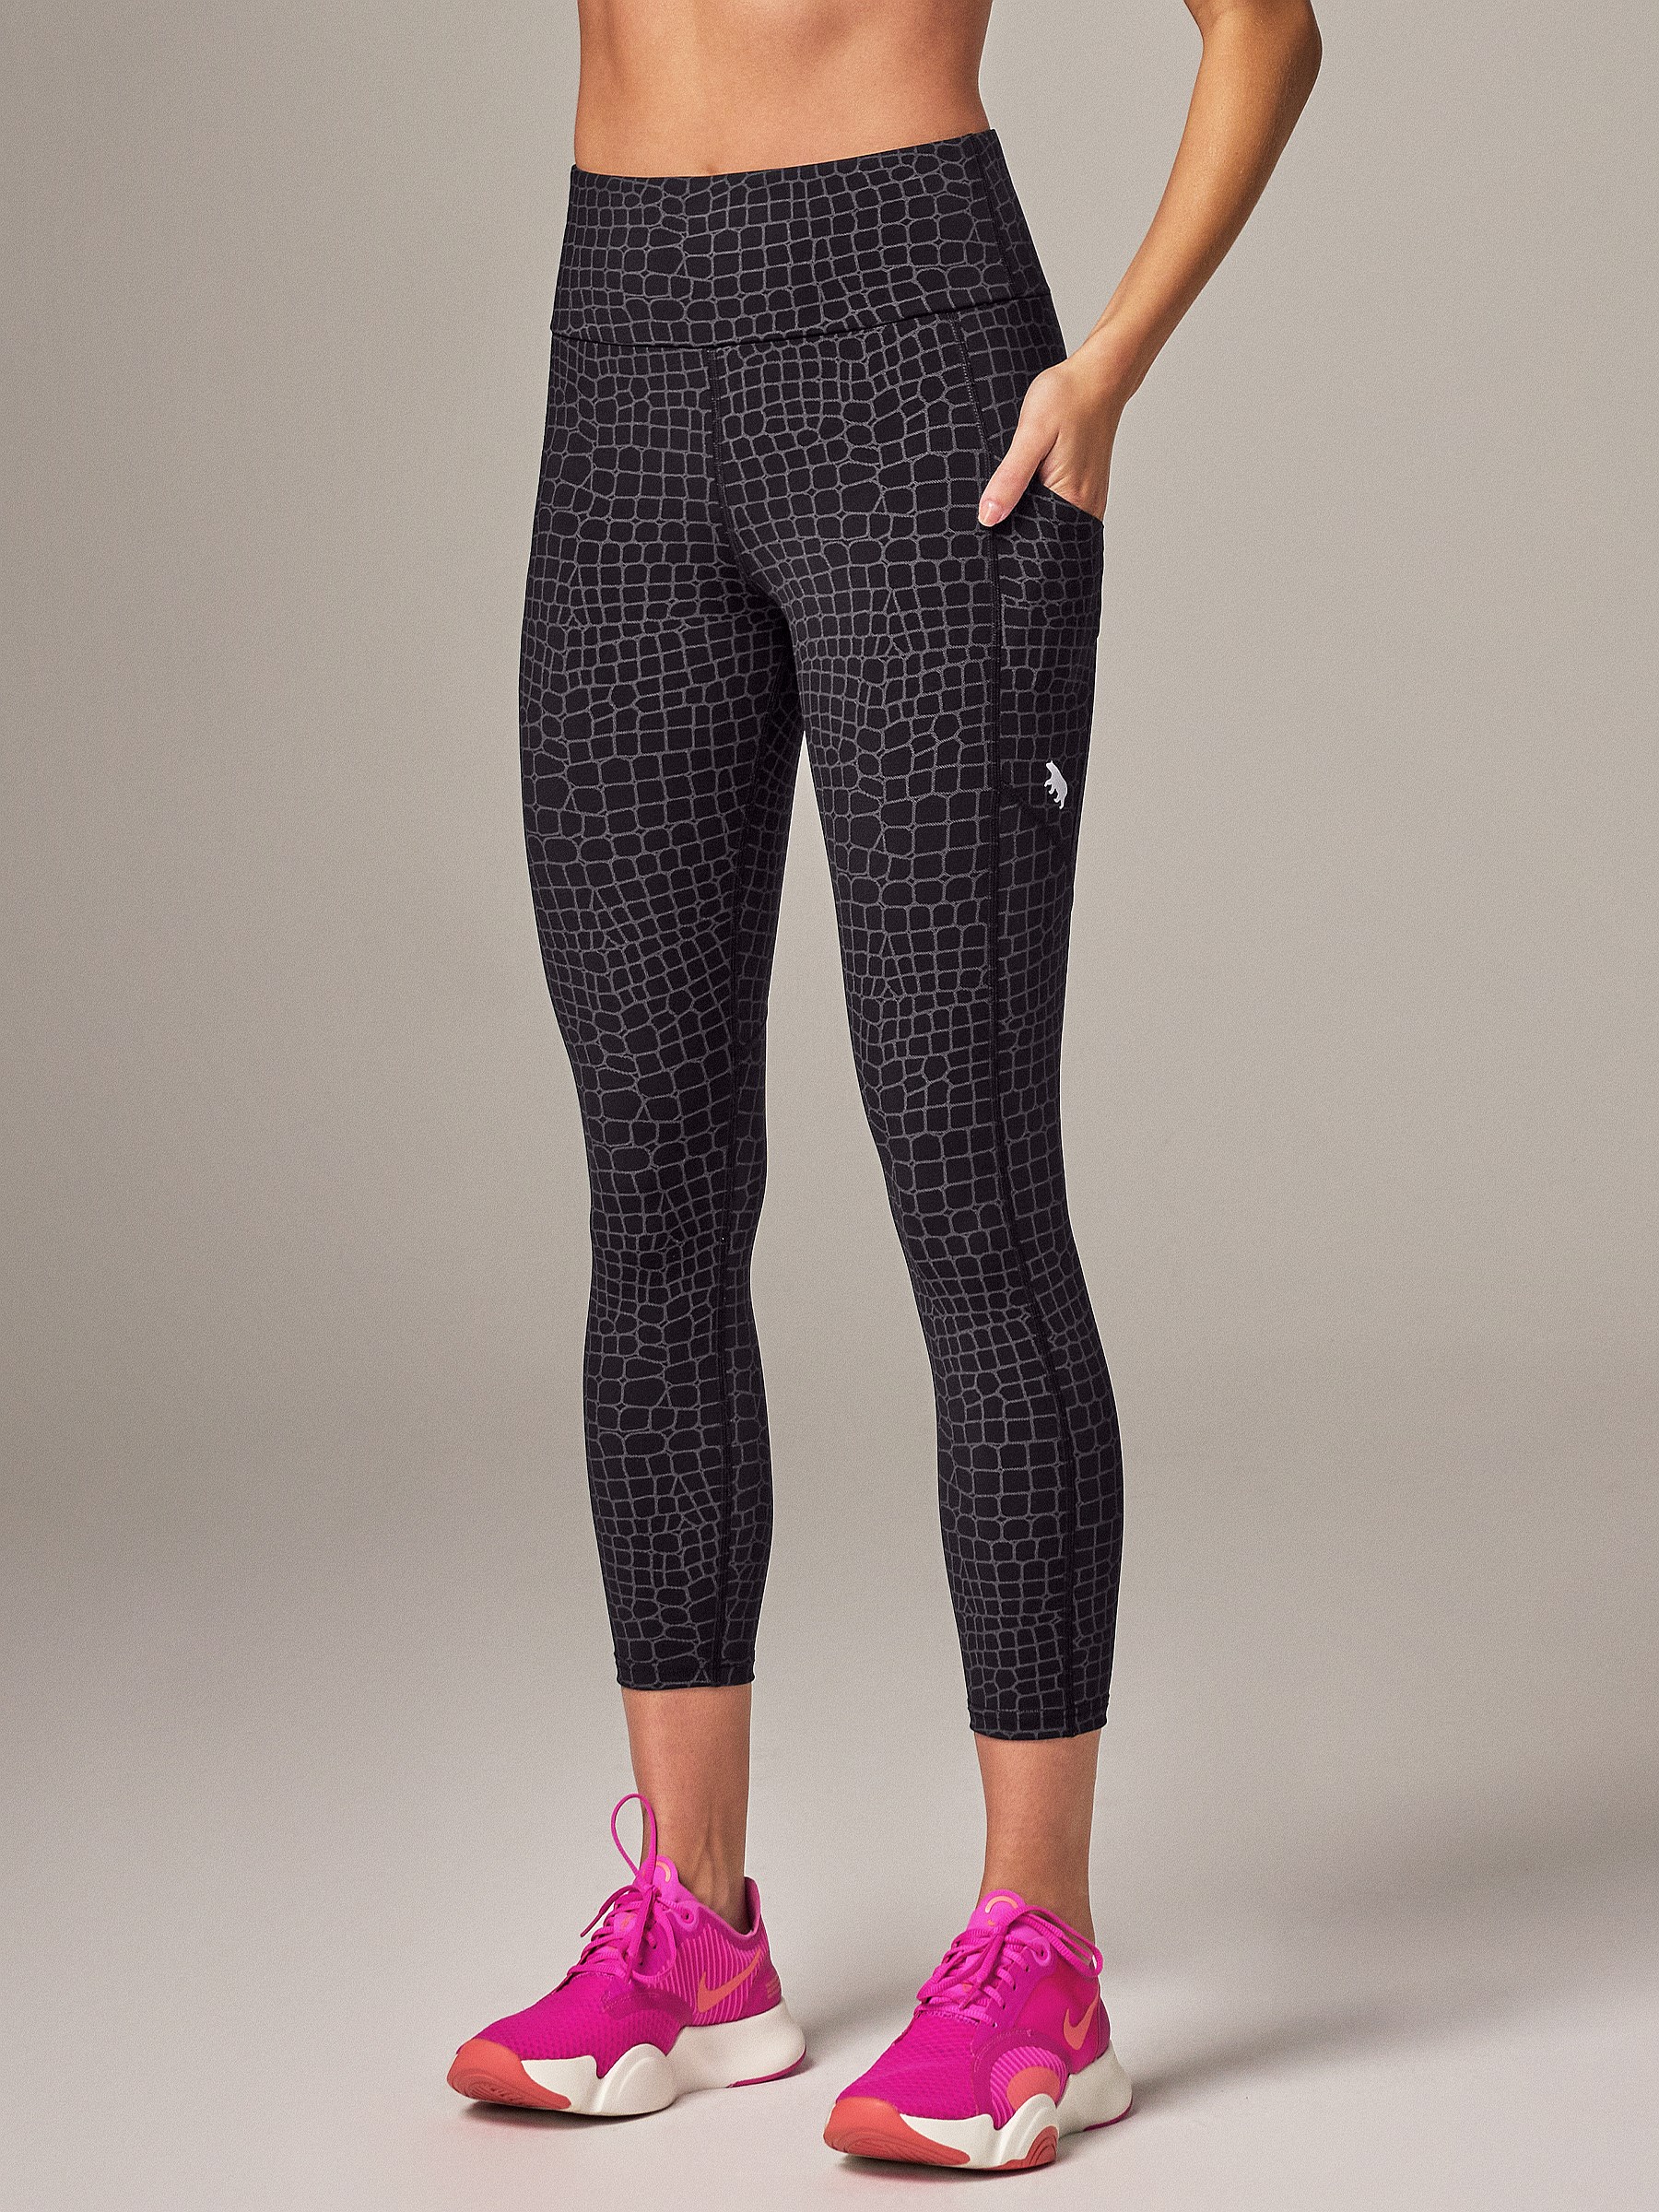 Bare the Chill in Running Bare Thermal Activewear Tights.